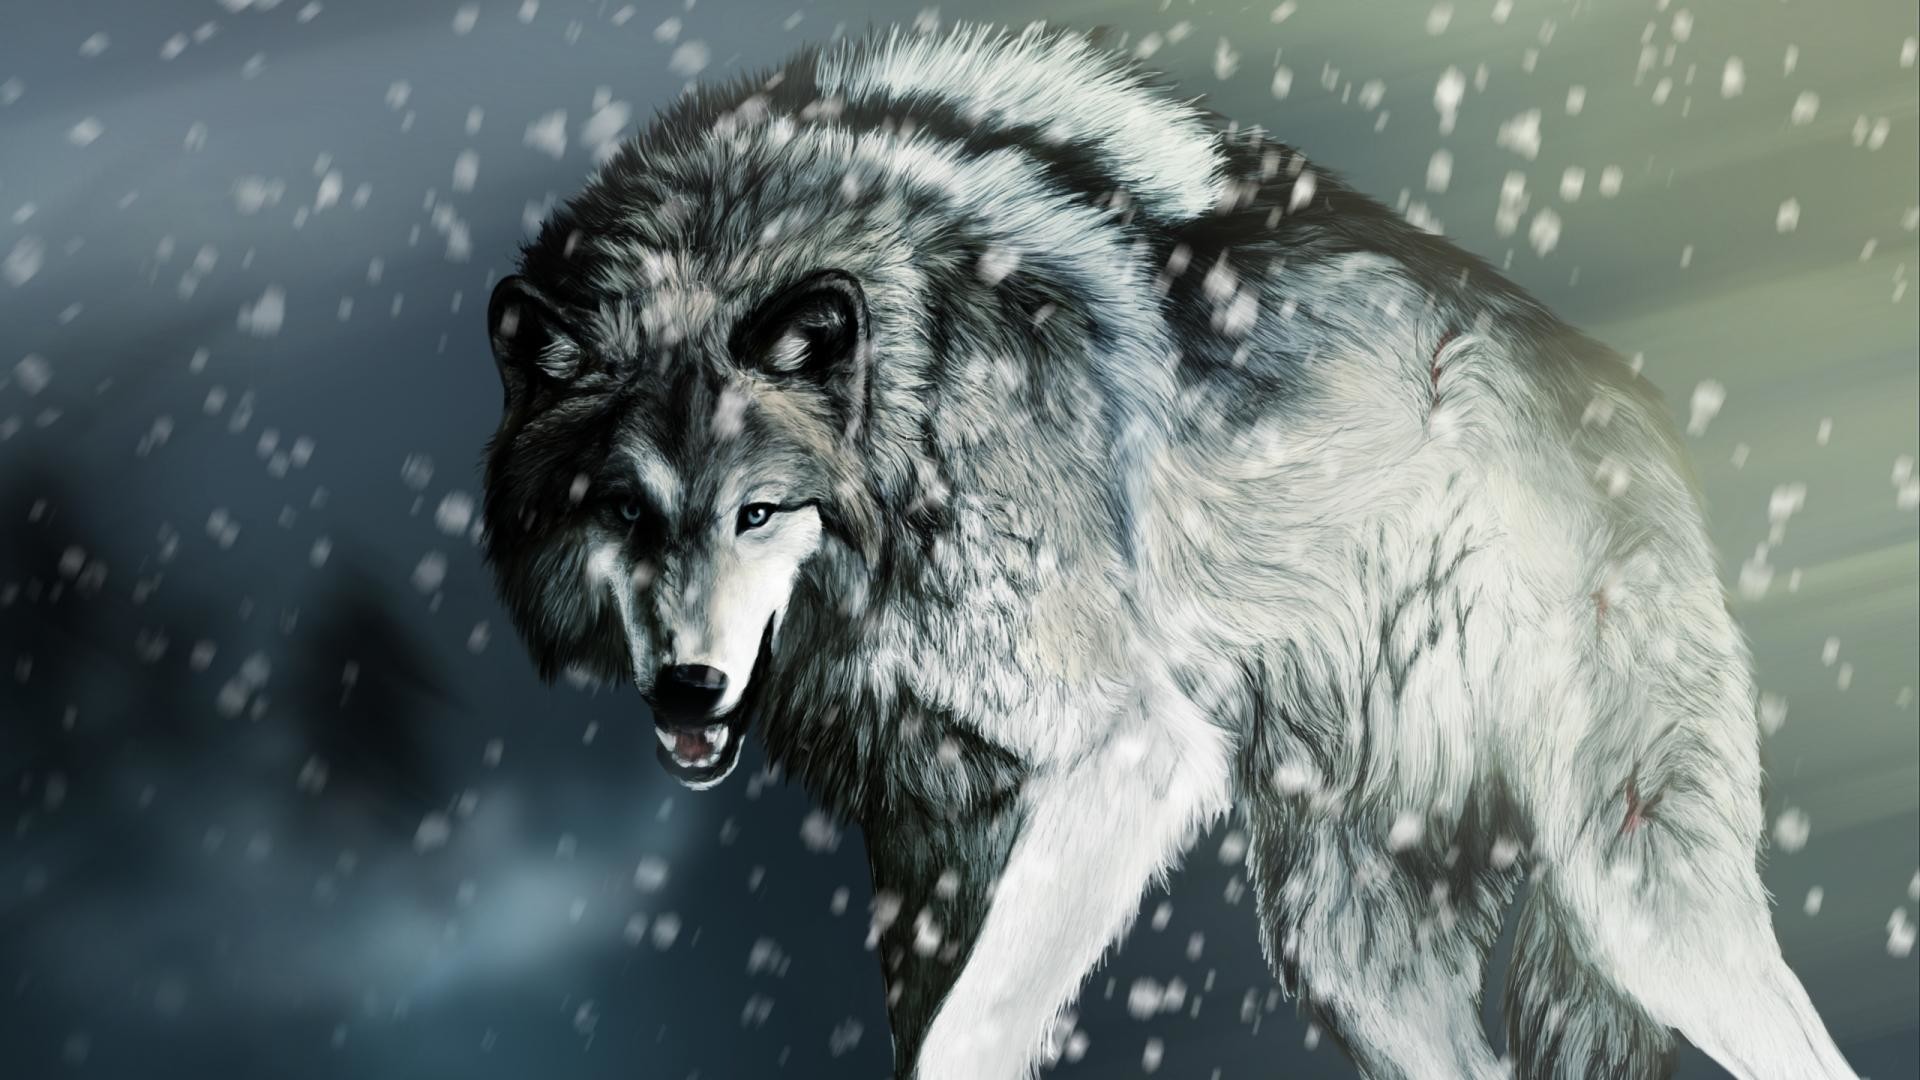 Wallpapers For > Cool Wolf Wallpaper Hd